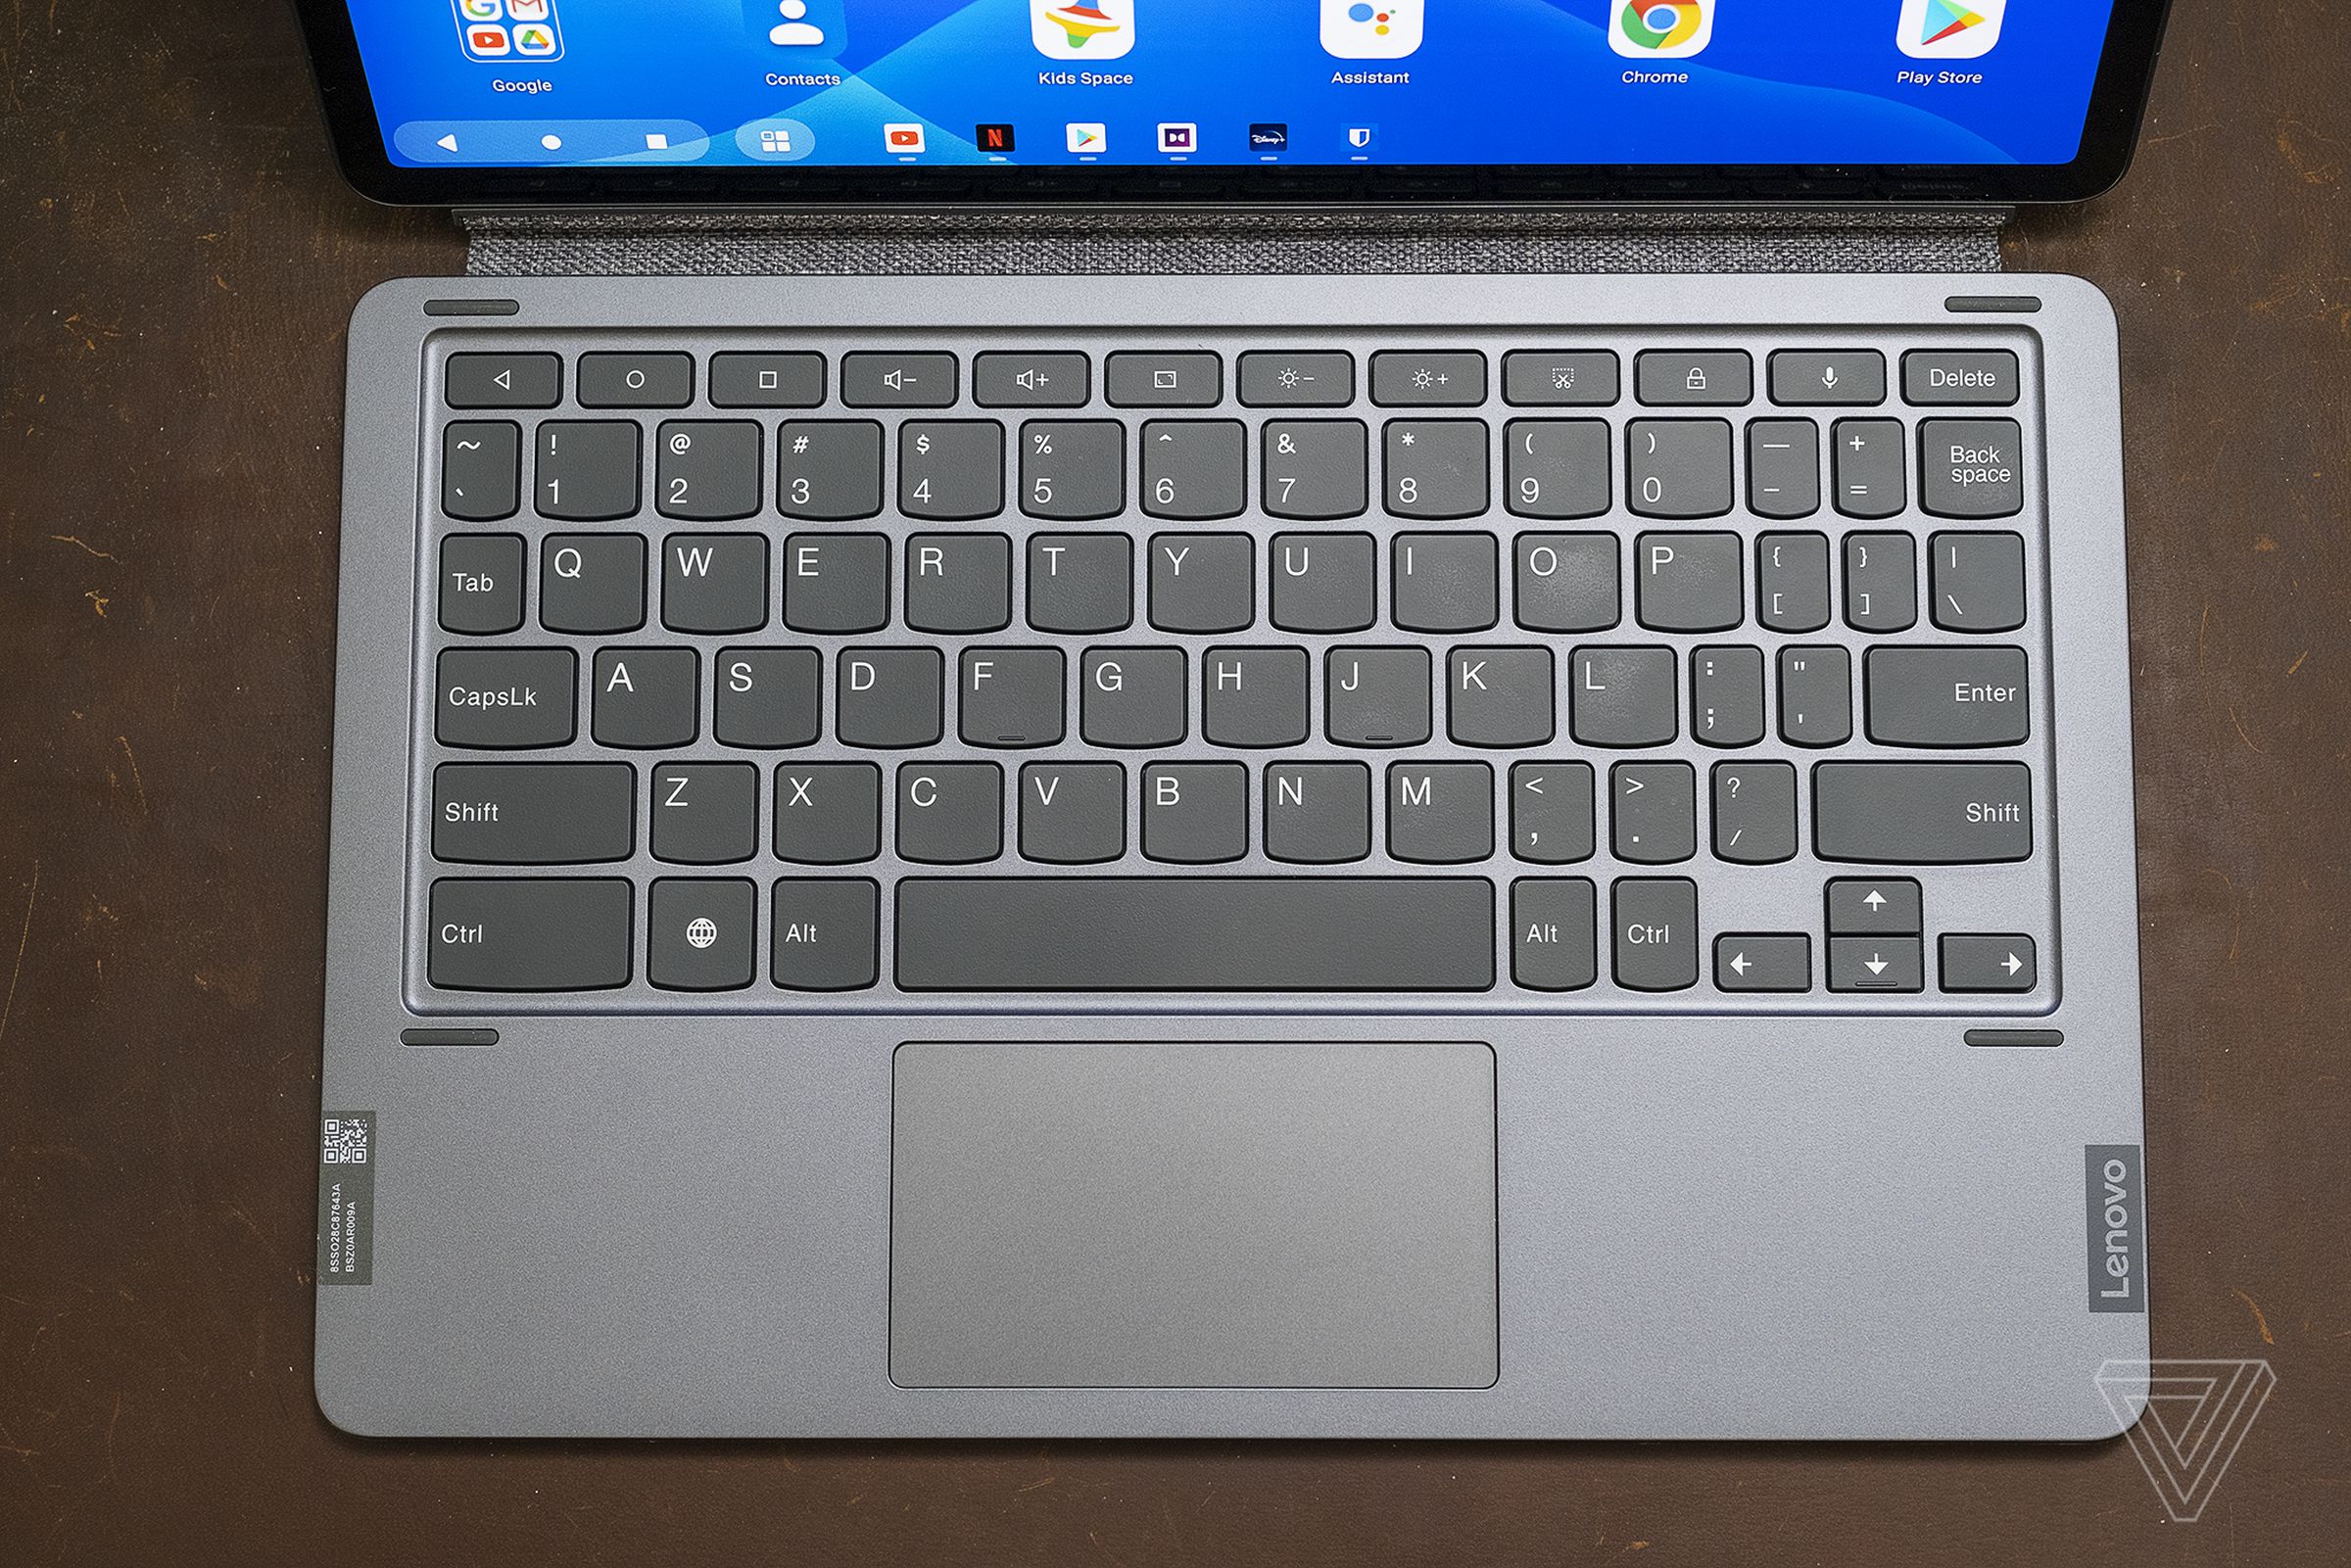 The detachable keyboard has a cramped layout and no backlighting, but it works in a pinch.